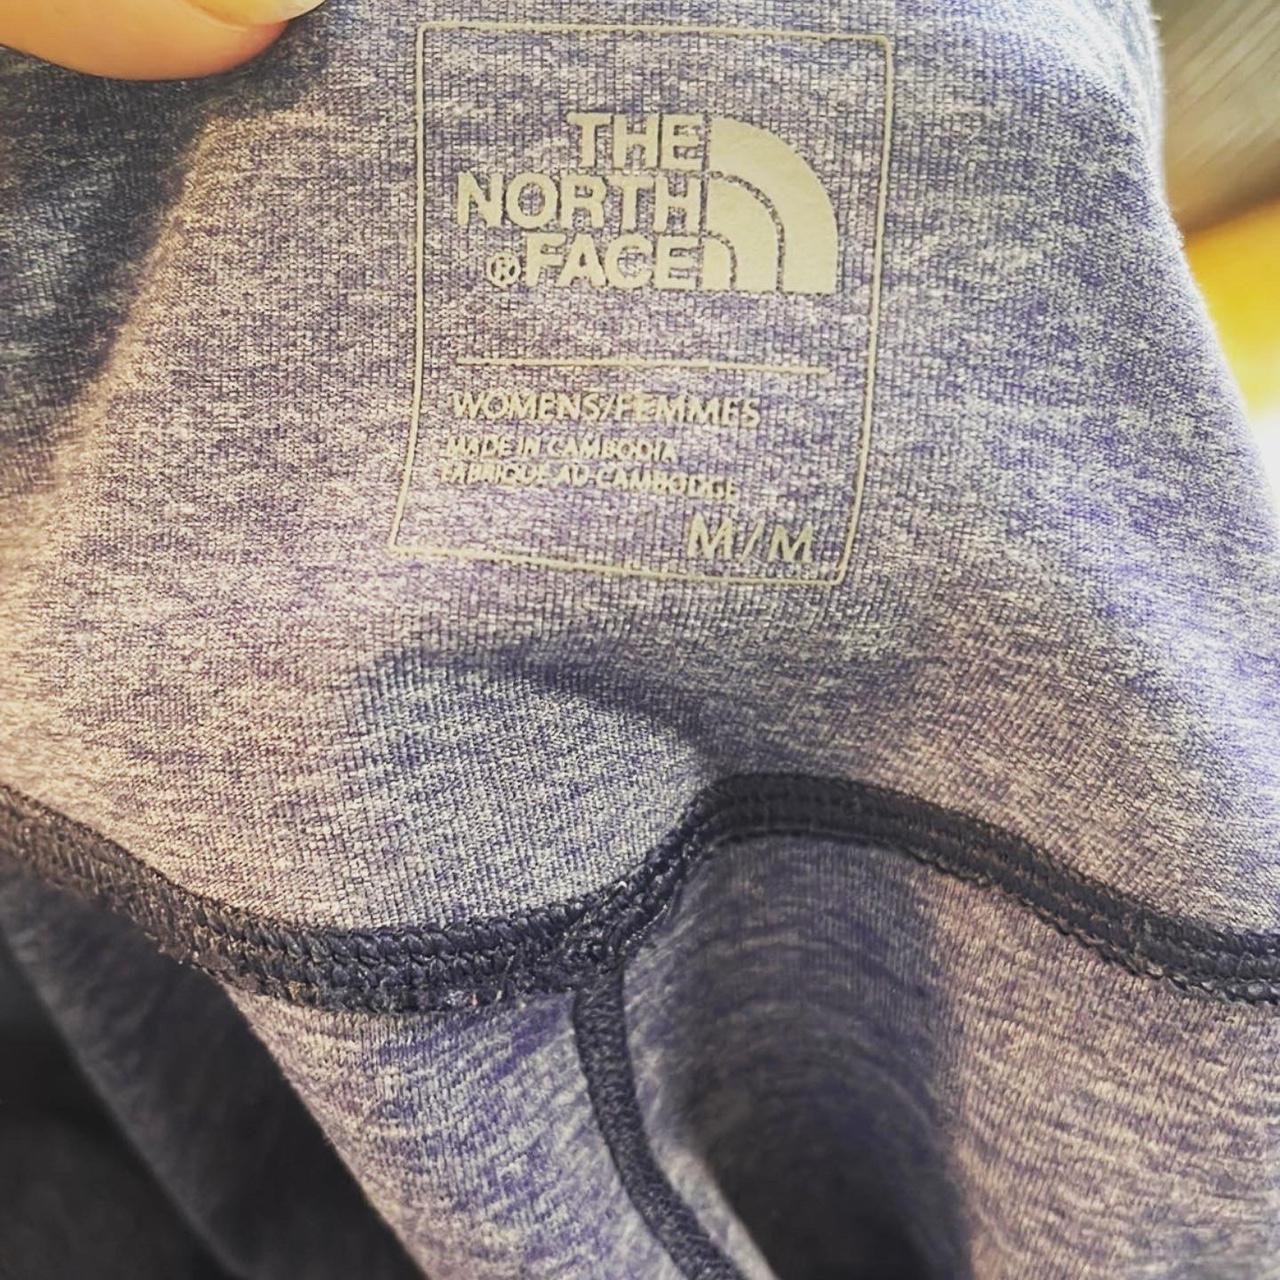 Product Image 3 - Brand new NorthFace Leggings 
Never